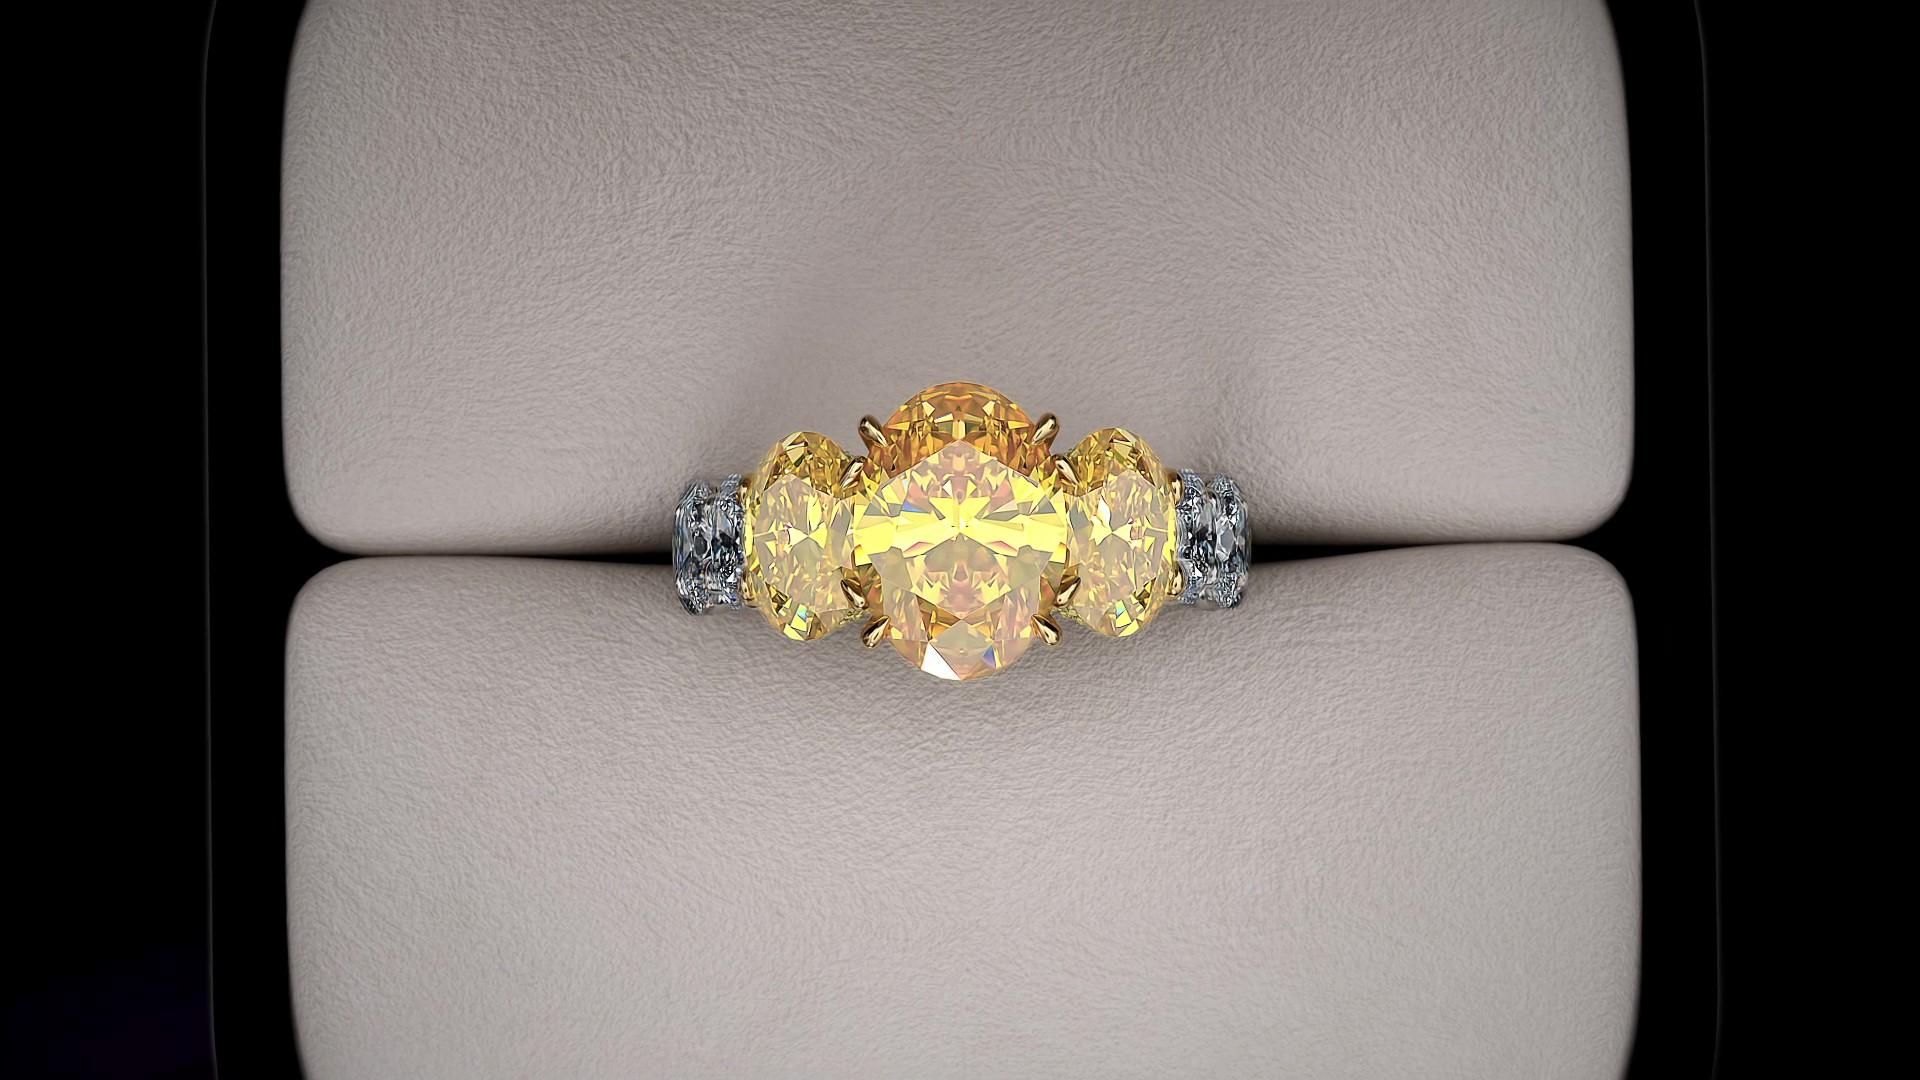 GIA Certified 5.11 carat total of Vivid Yellow Intense Oval diamonds, clarity ranging between VVS and VS, rich yellow color, no fluorescence, five graduated diamonds, made in 18k yellow gold and platinum, and approximately 3.6 carat white Oval